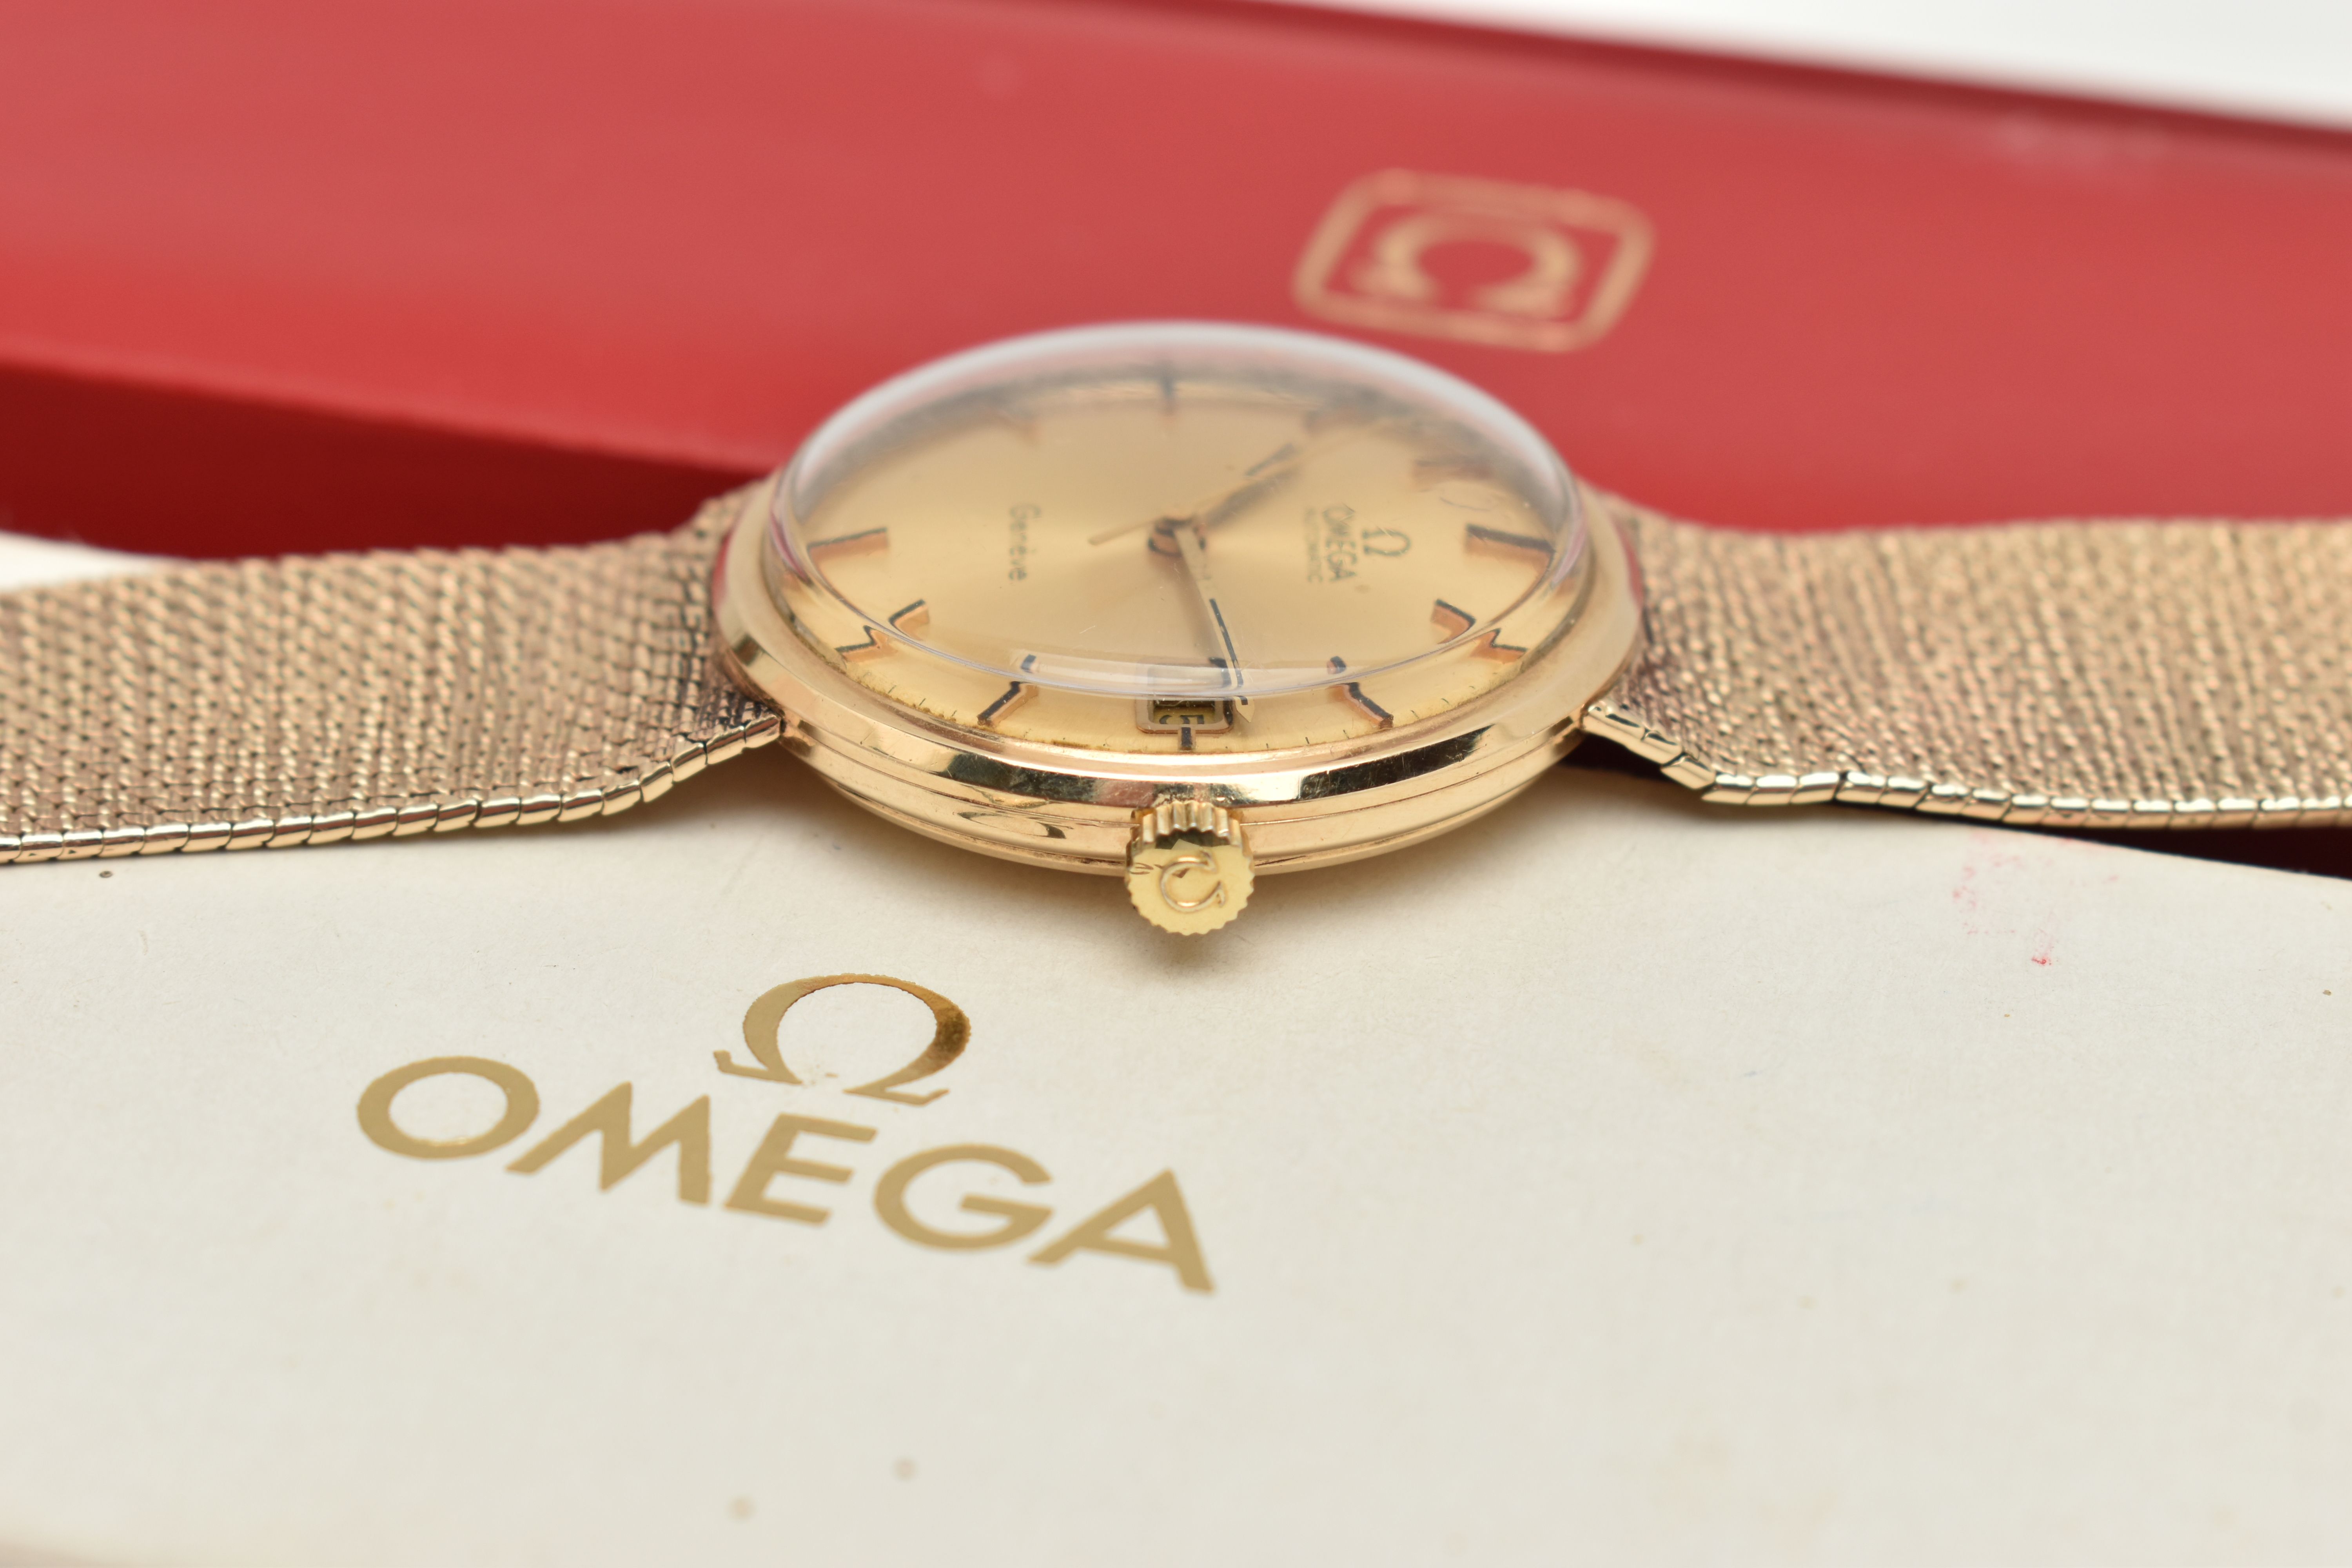 A 9CT GOLD 'OMEGA' WRISTWATCH, automatic movement, round gold tone dial, signed 'Omega automatic - Image 9 of 9